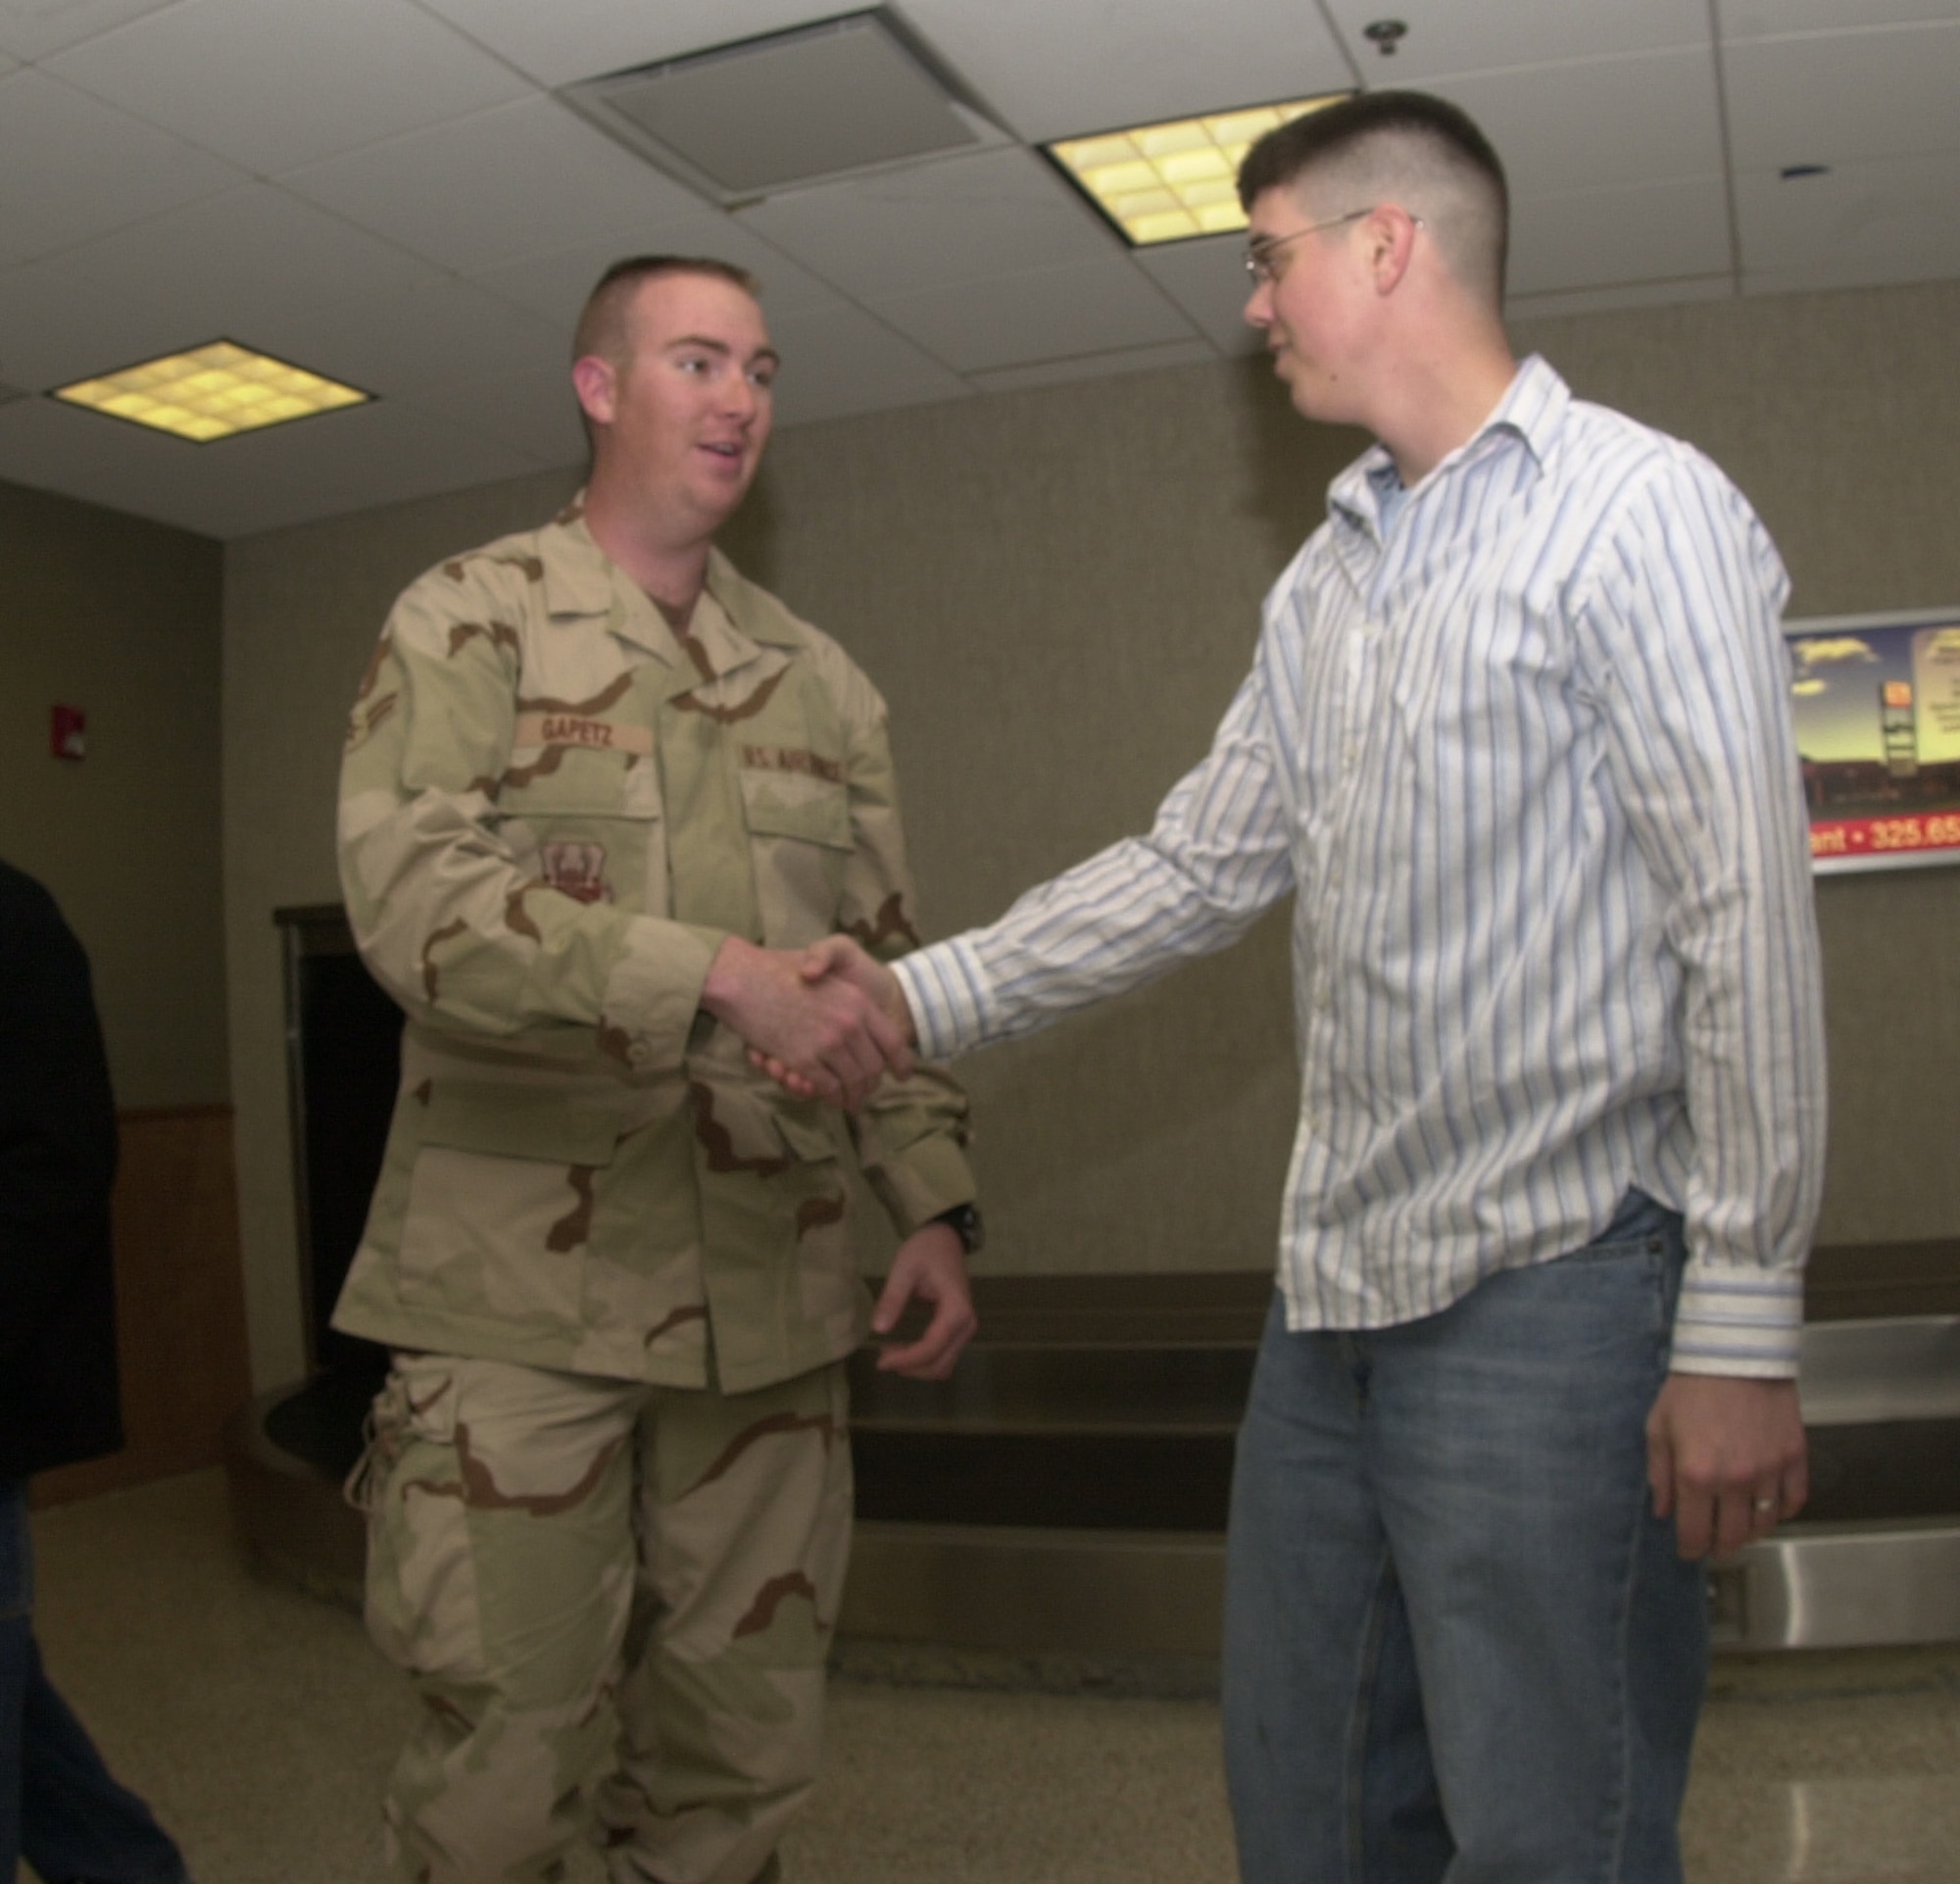 Airman 1st Class Christopher Gapetz (in uniform) is welcomed back home by Senior Airman Brandon Howland, a fellow colleague from the 17th Civil Engineer Squadron Jan. 20, 2007 at San Angelop Regional Airport.  Airman Gapetz was one of more than a dozen deployed servicemembers who returned back to Goodfellow after serving a 120-day tour.  Airman Gapetz was deployed to Ali Al Salem Air Base, Kuwait.  (U.S. Air Force photo by Airman 1st Class Luis Loza Gutierrez)